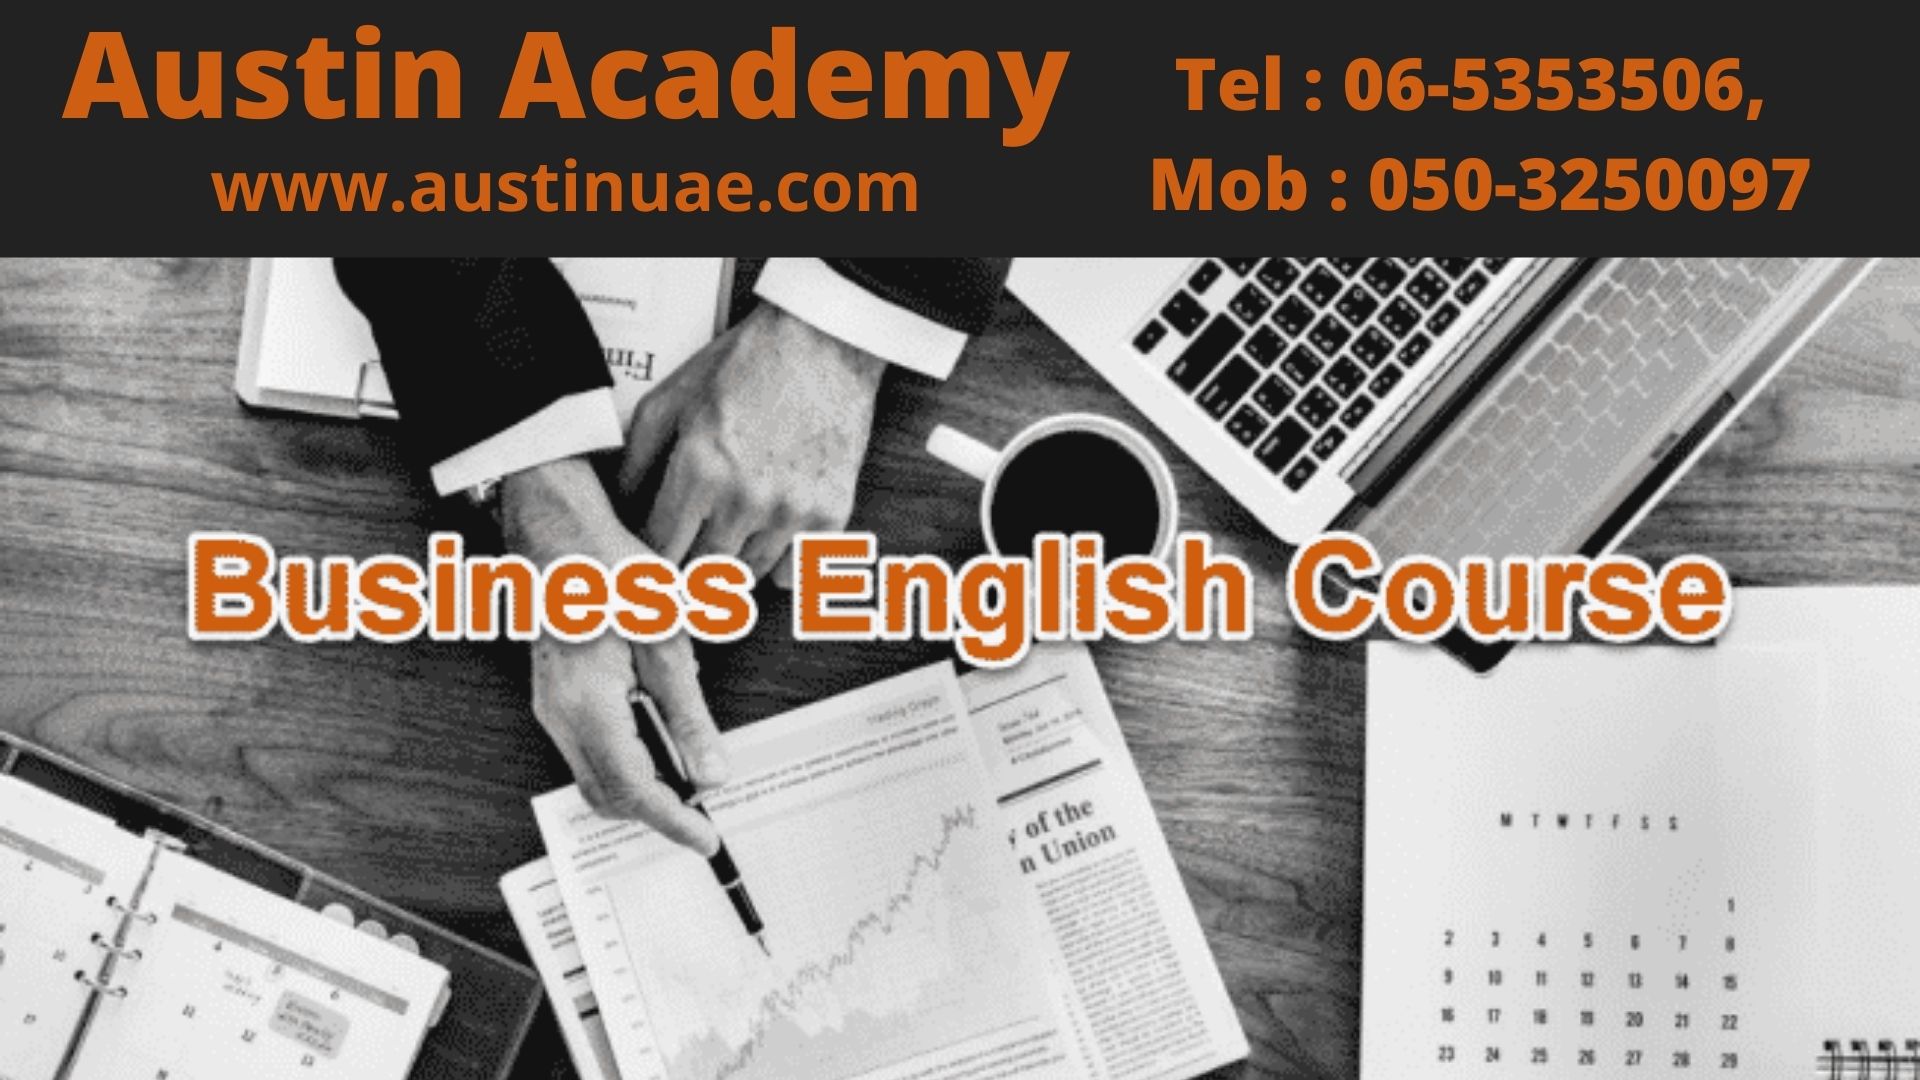 Business English Classes In Sharjah With Best Offer 0588197415